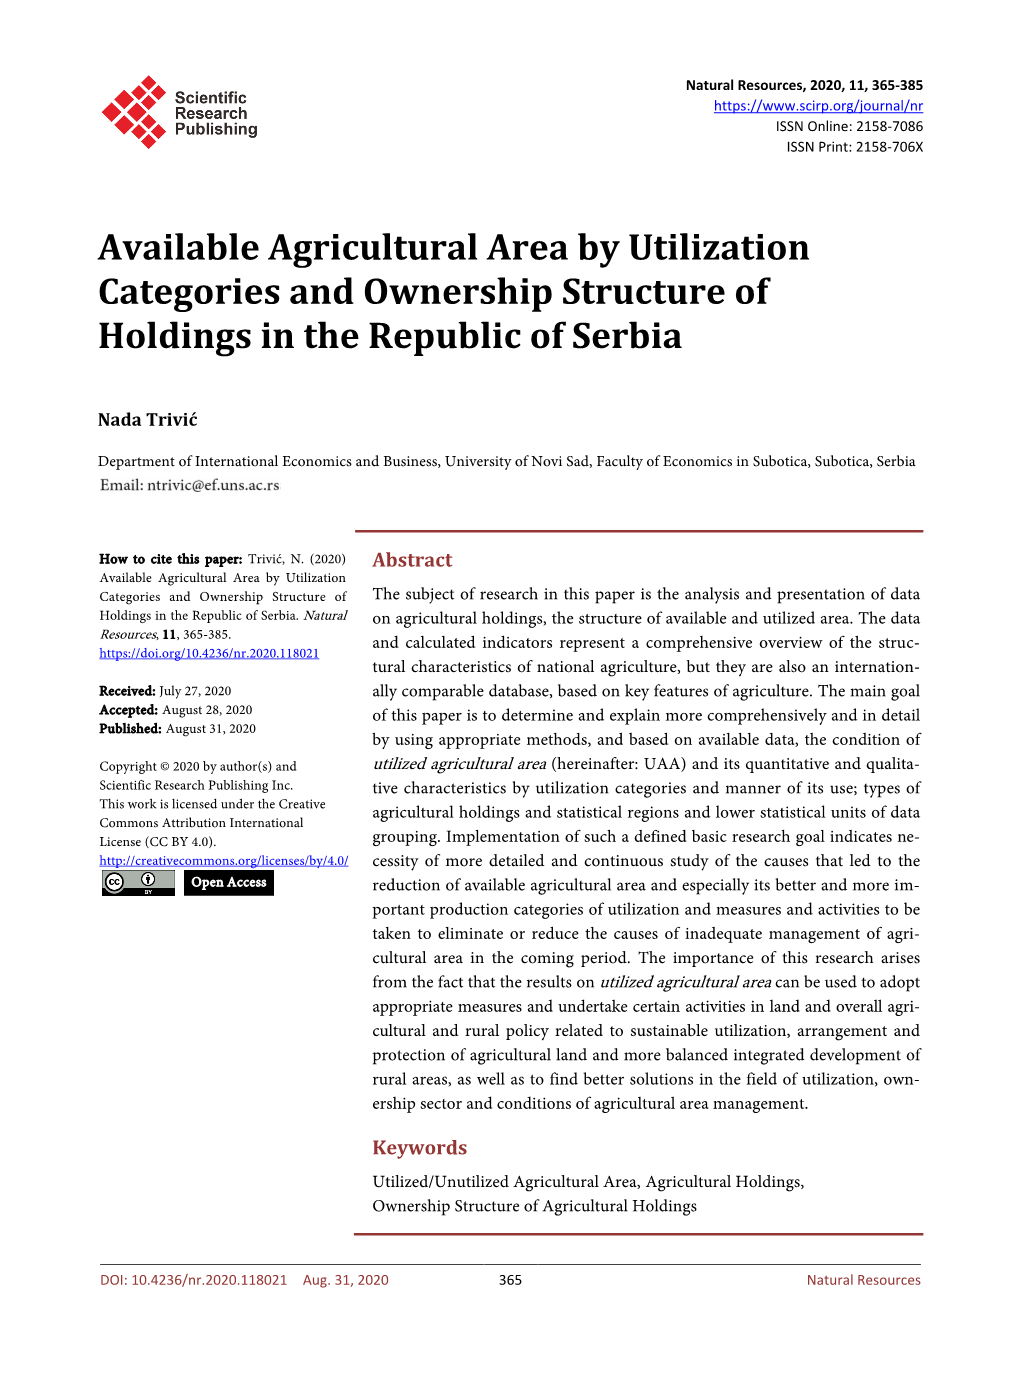 Available Agricultural Area by Utilization Categories and Ownership Structure of Holdings in the Republic of Serbia